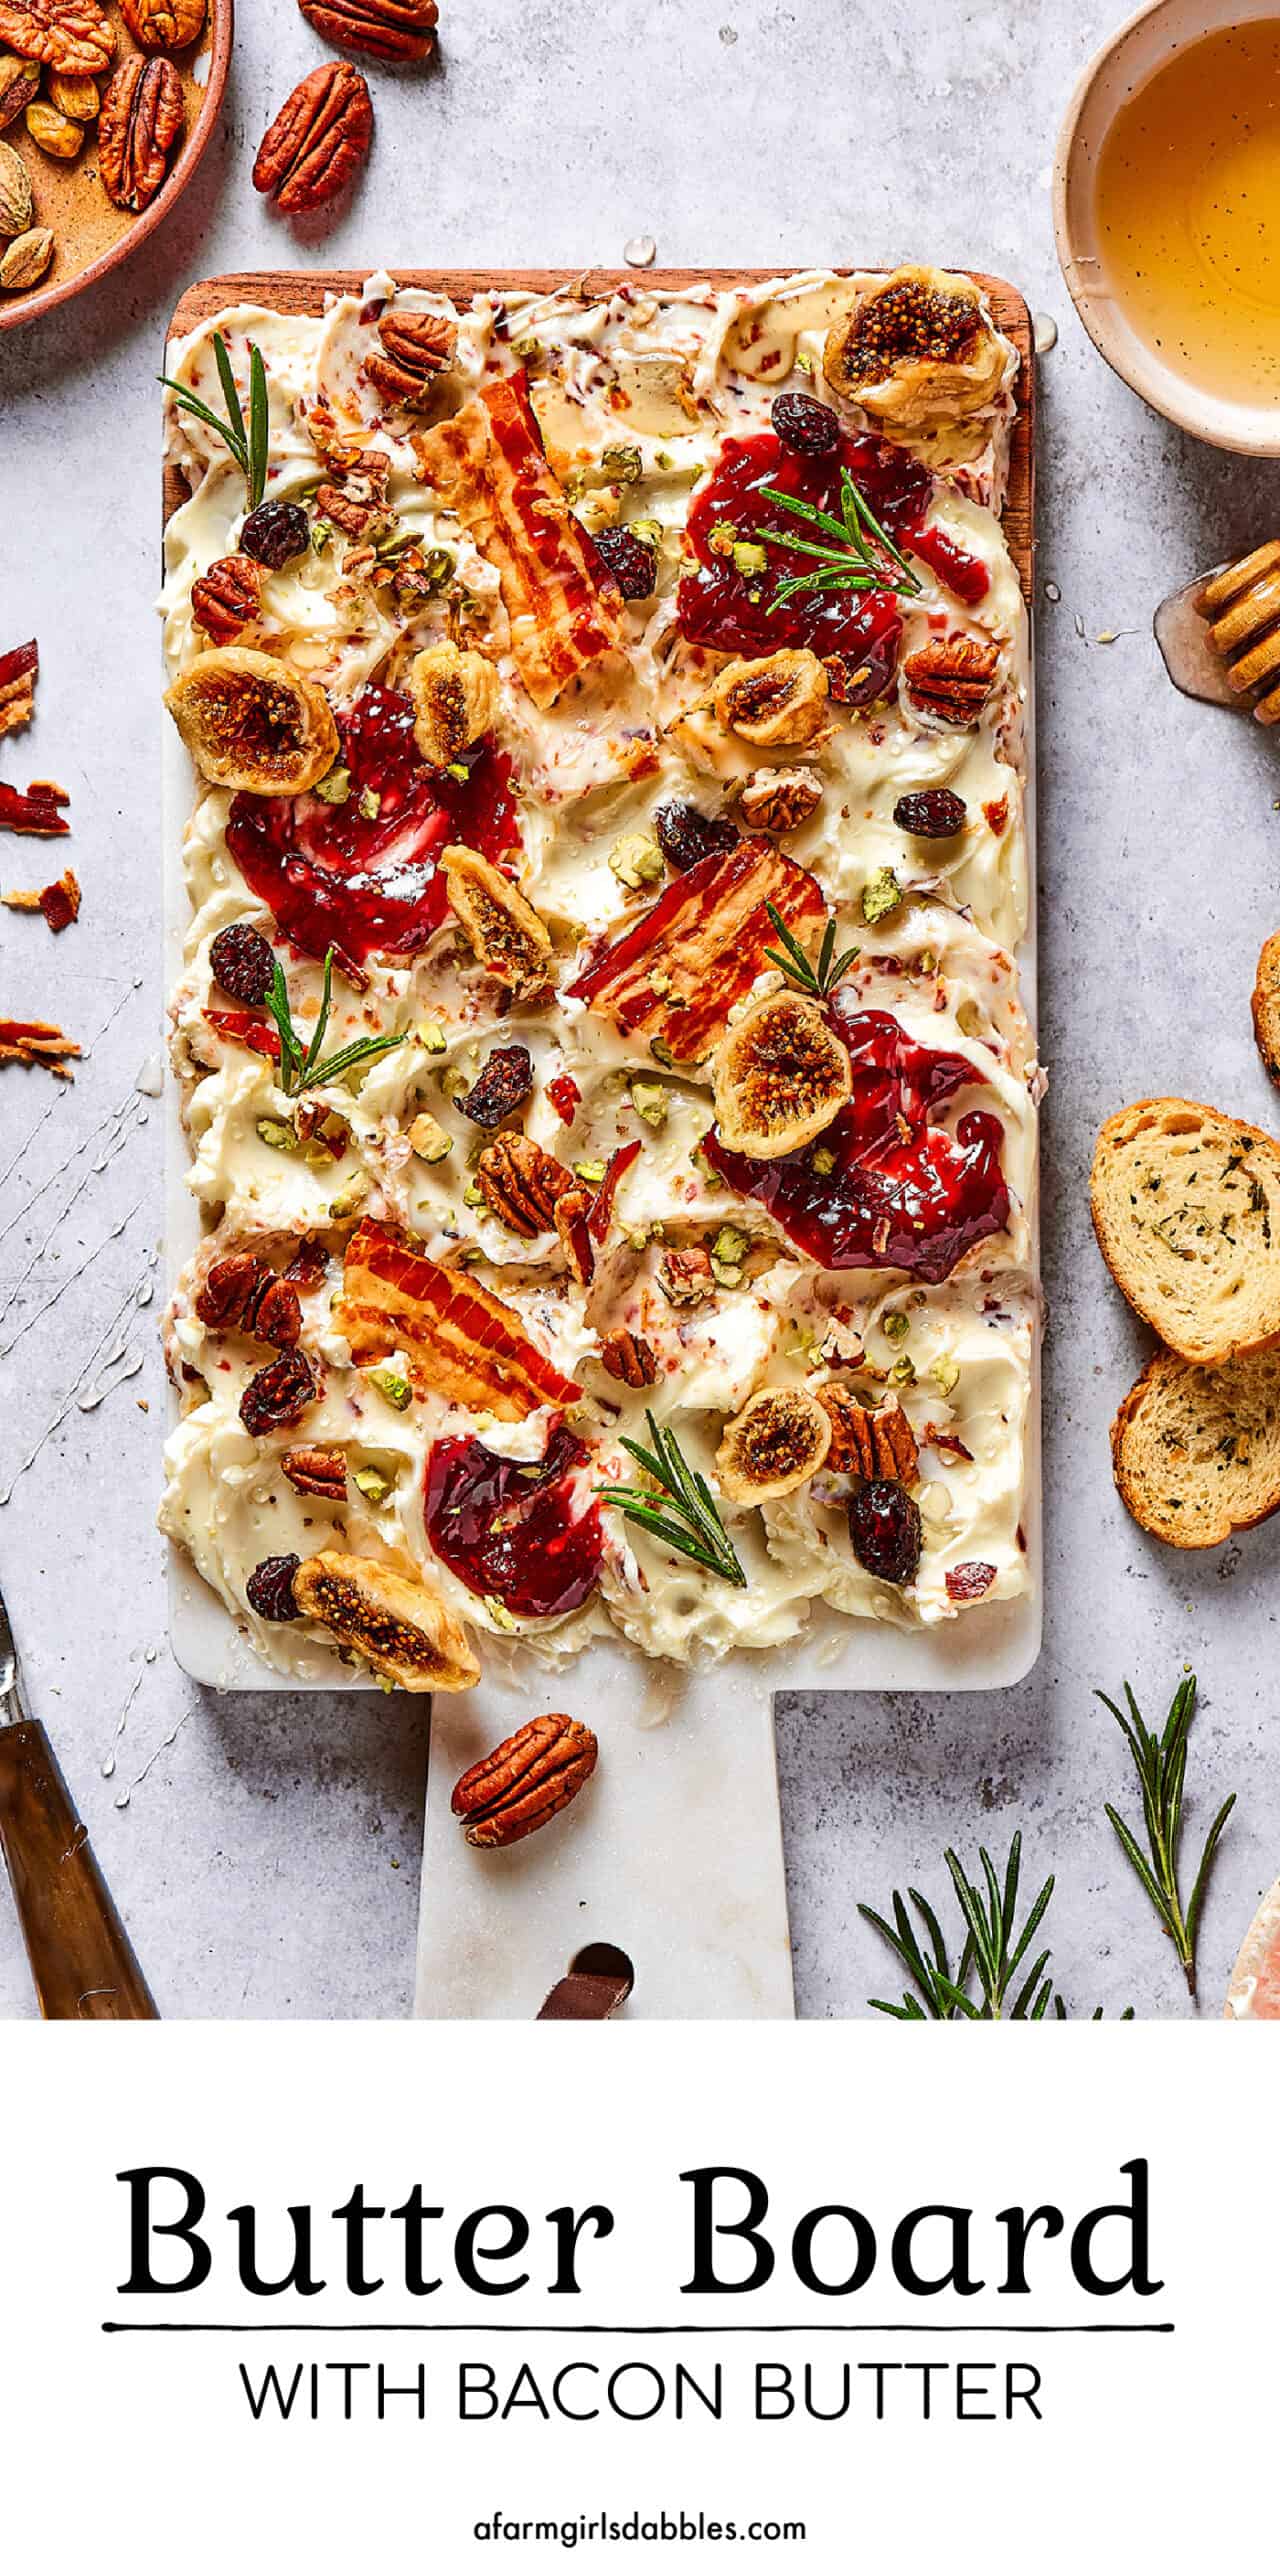 Pinterest image for Butter Board with Bacon Butter